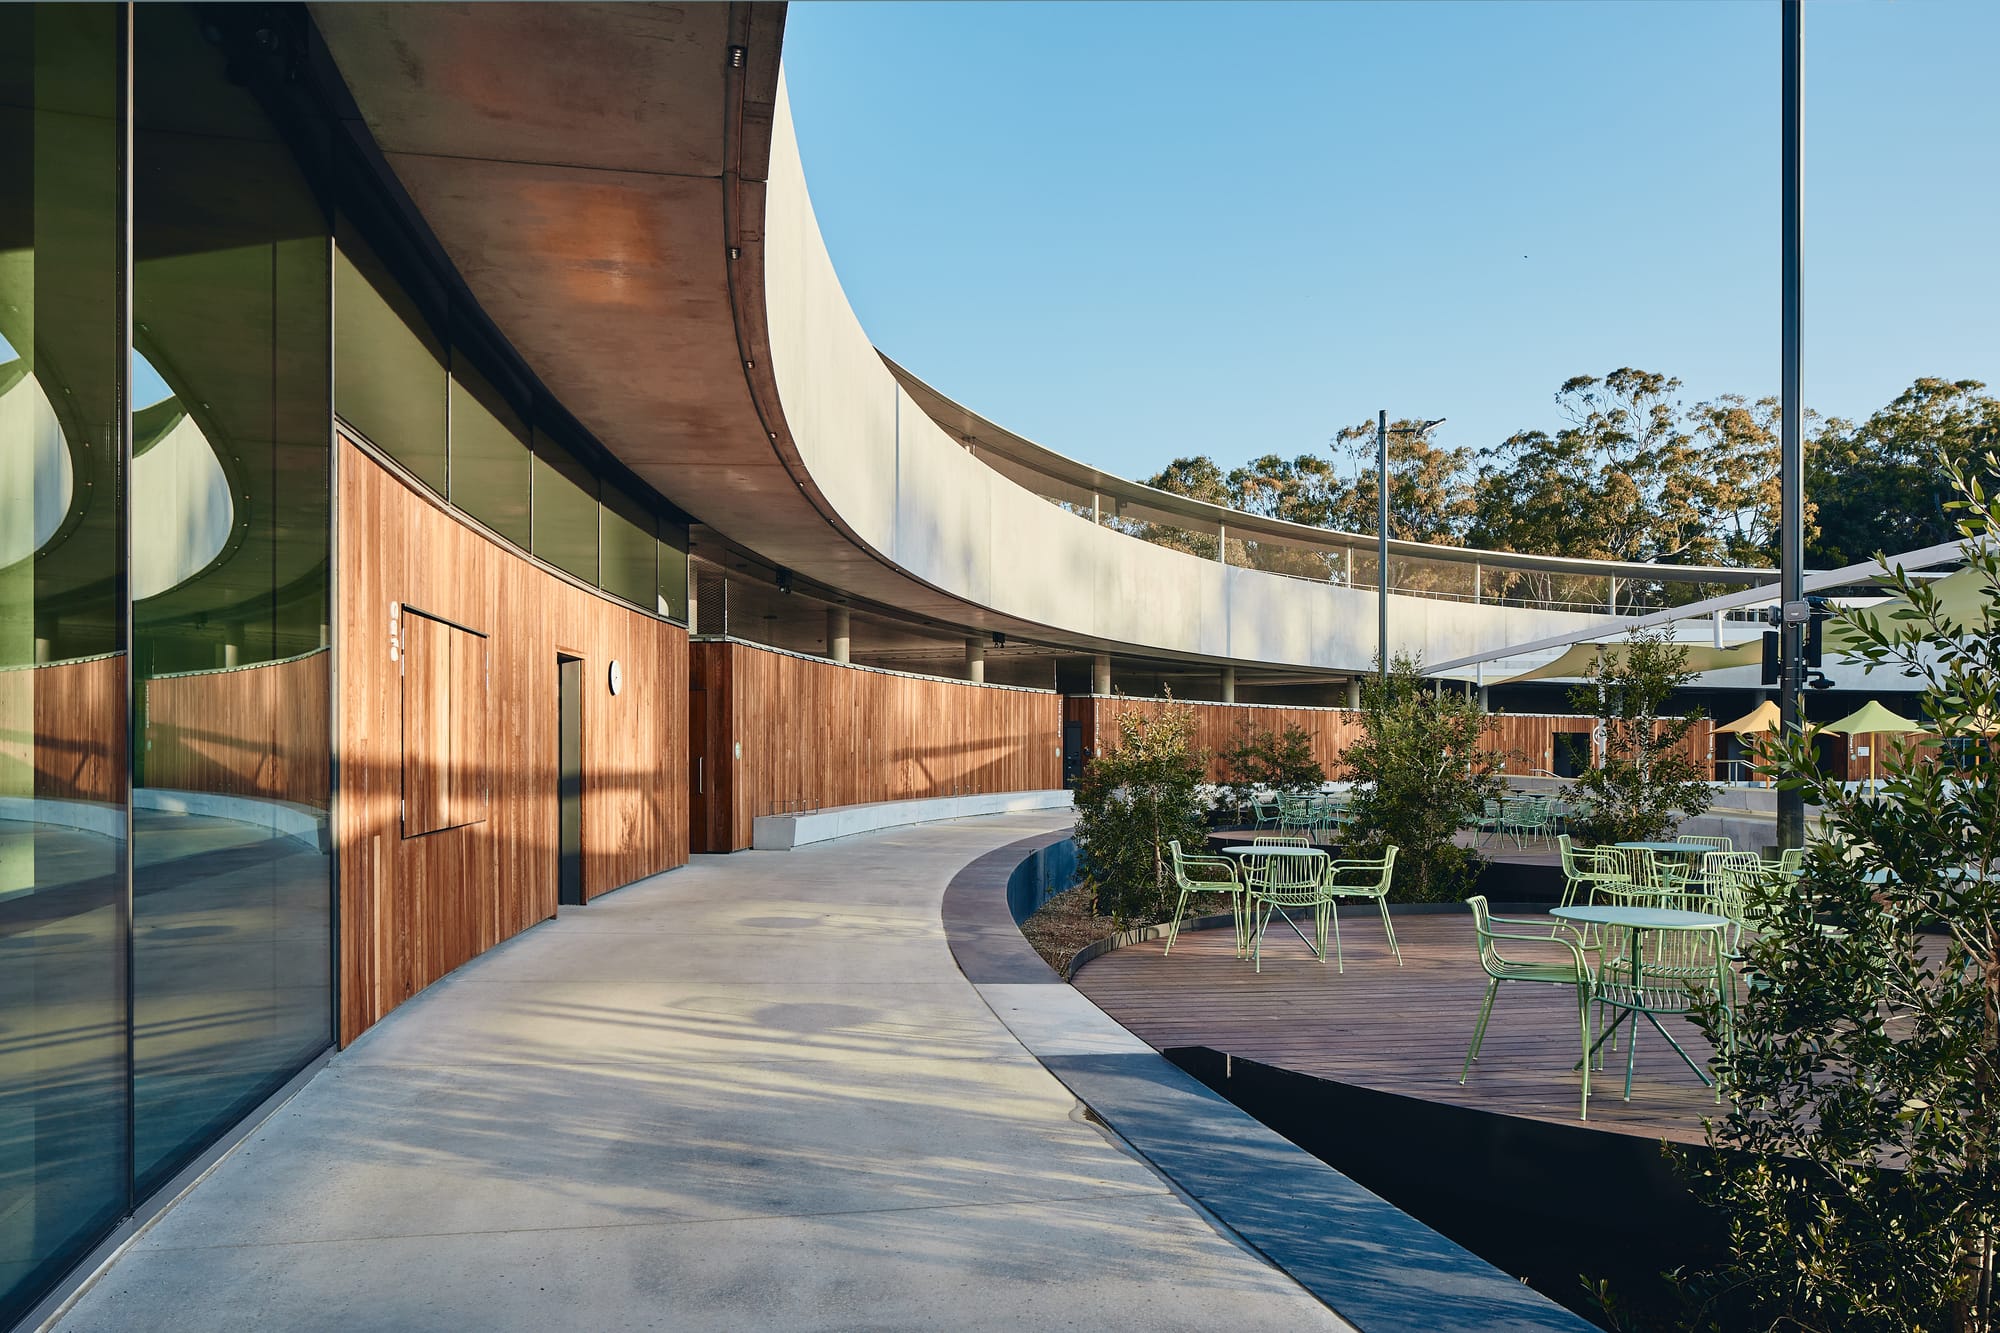 Parramatta Aquatic Centre by Mortlock Timbers. Photography by Peter Bennetts. Curved outdoor walkway clad in timber. Timber deck deating area. 